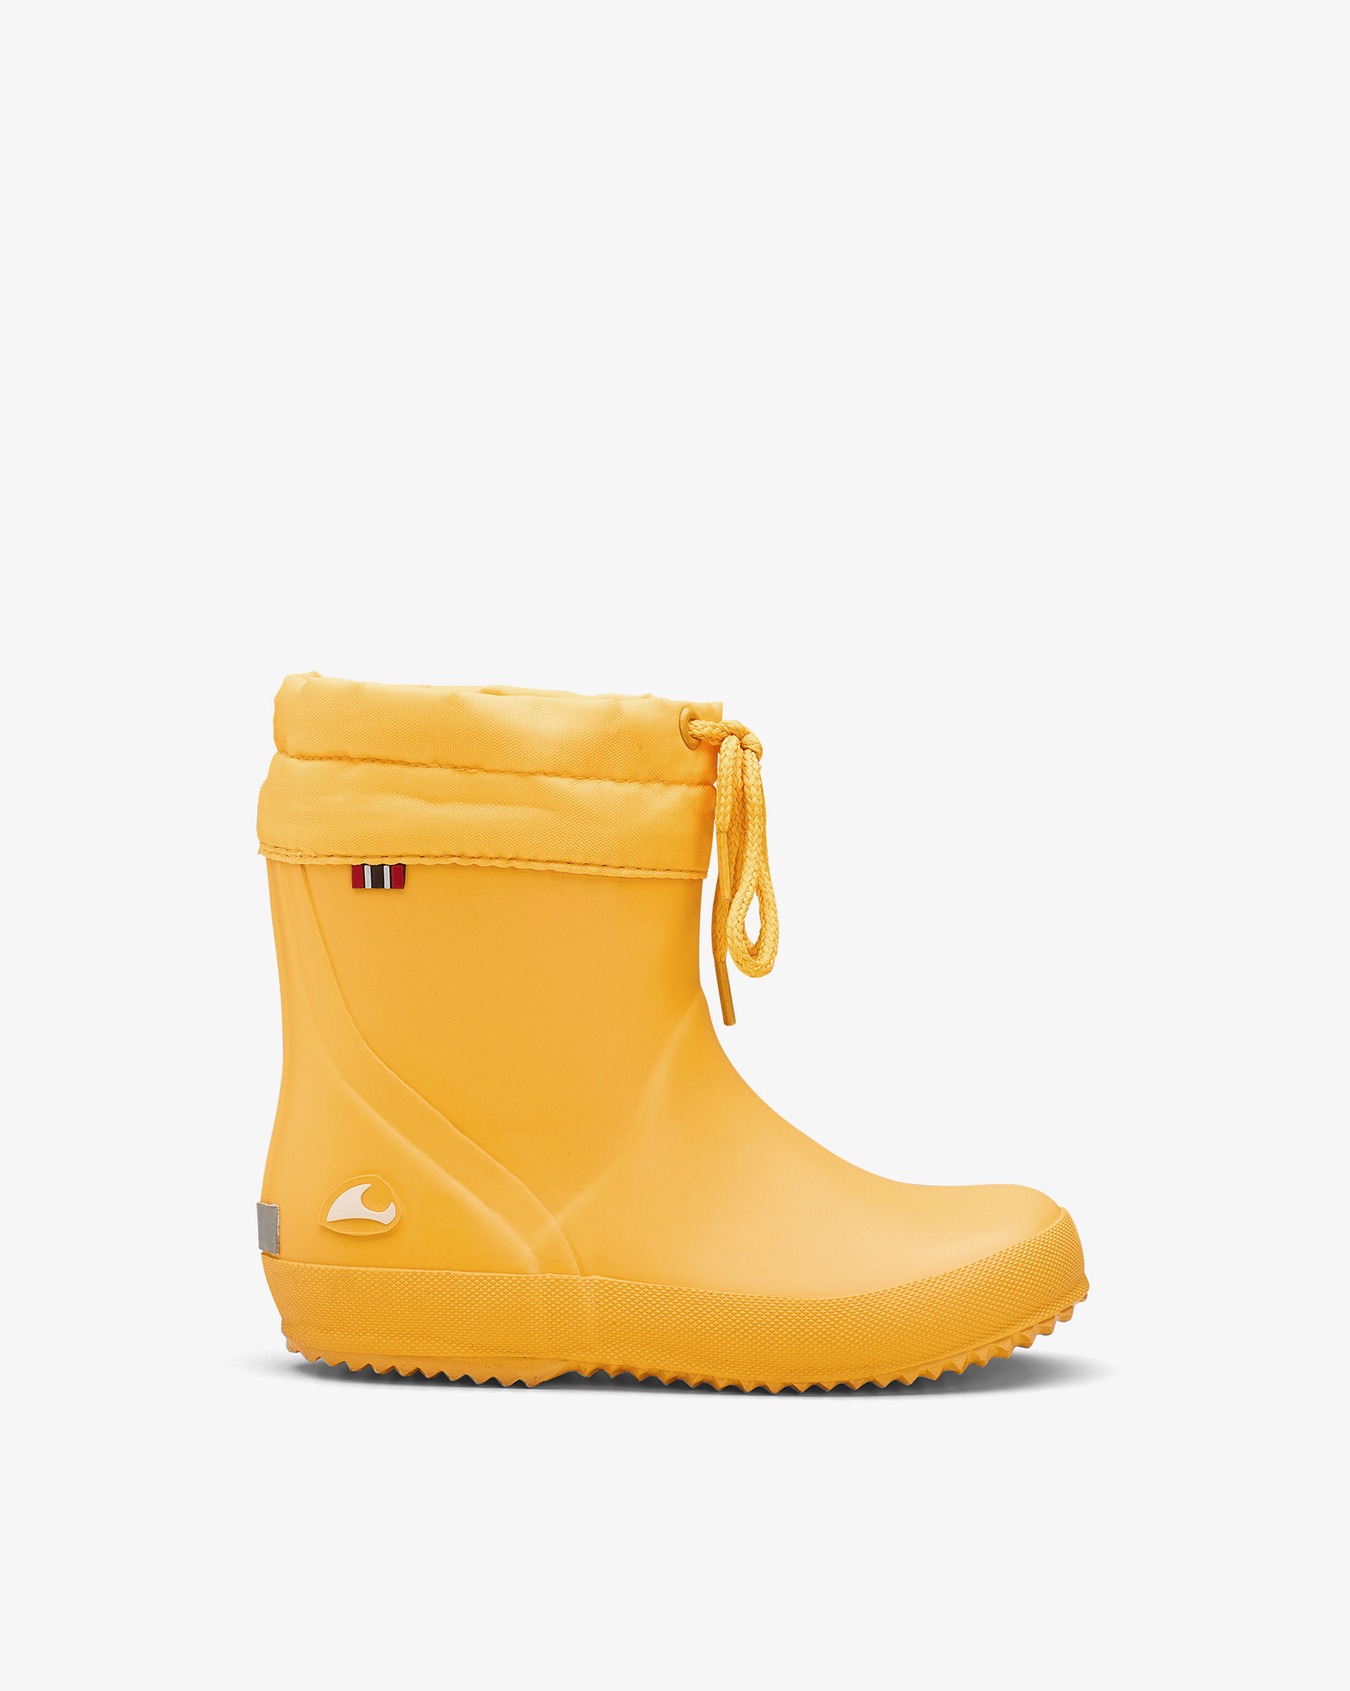 Alv Indie Sun/Yellow Rubber Boot